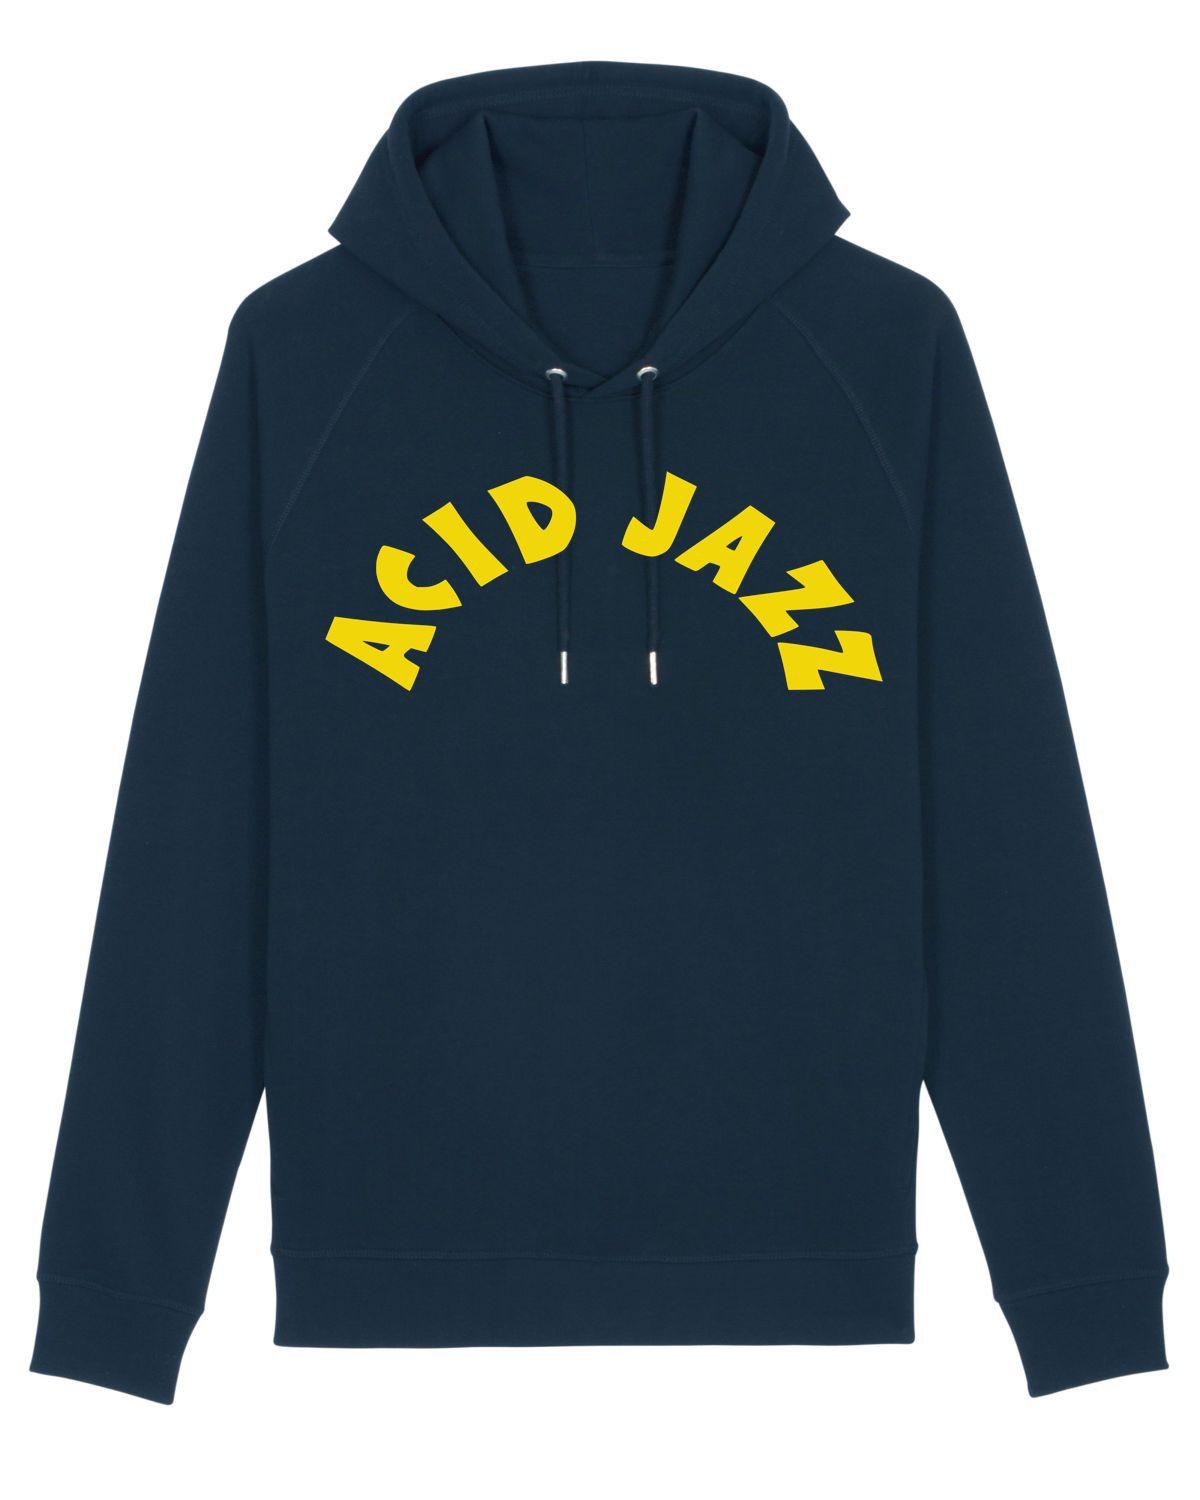 ACID JAZZ: College Hoodie Official Merchandise of Acid Jazz Records - SOUND IS COLOUR